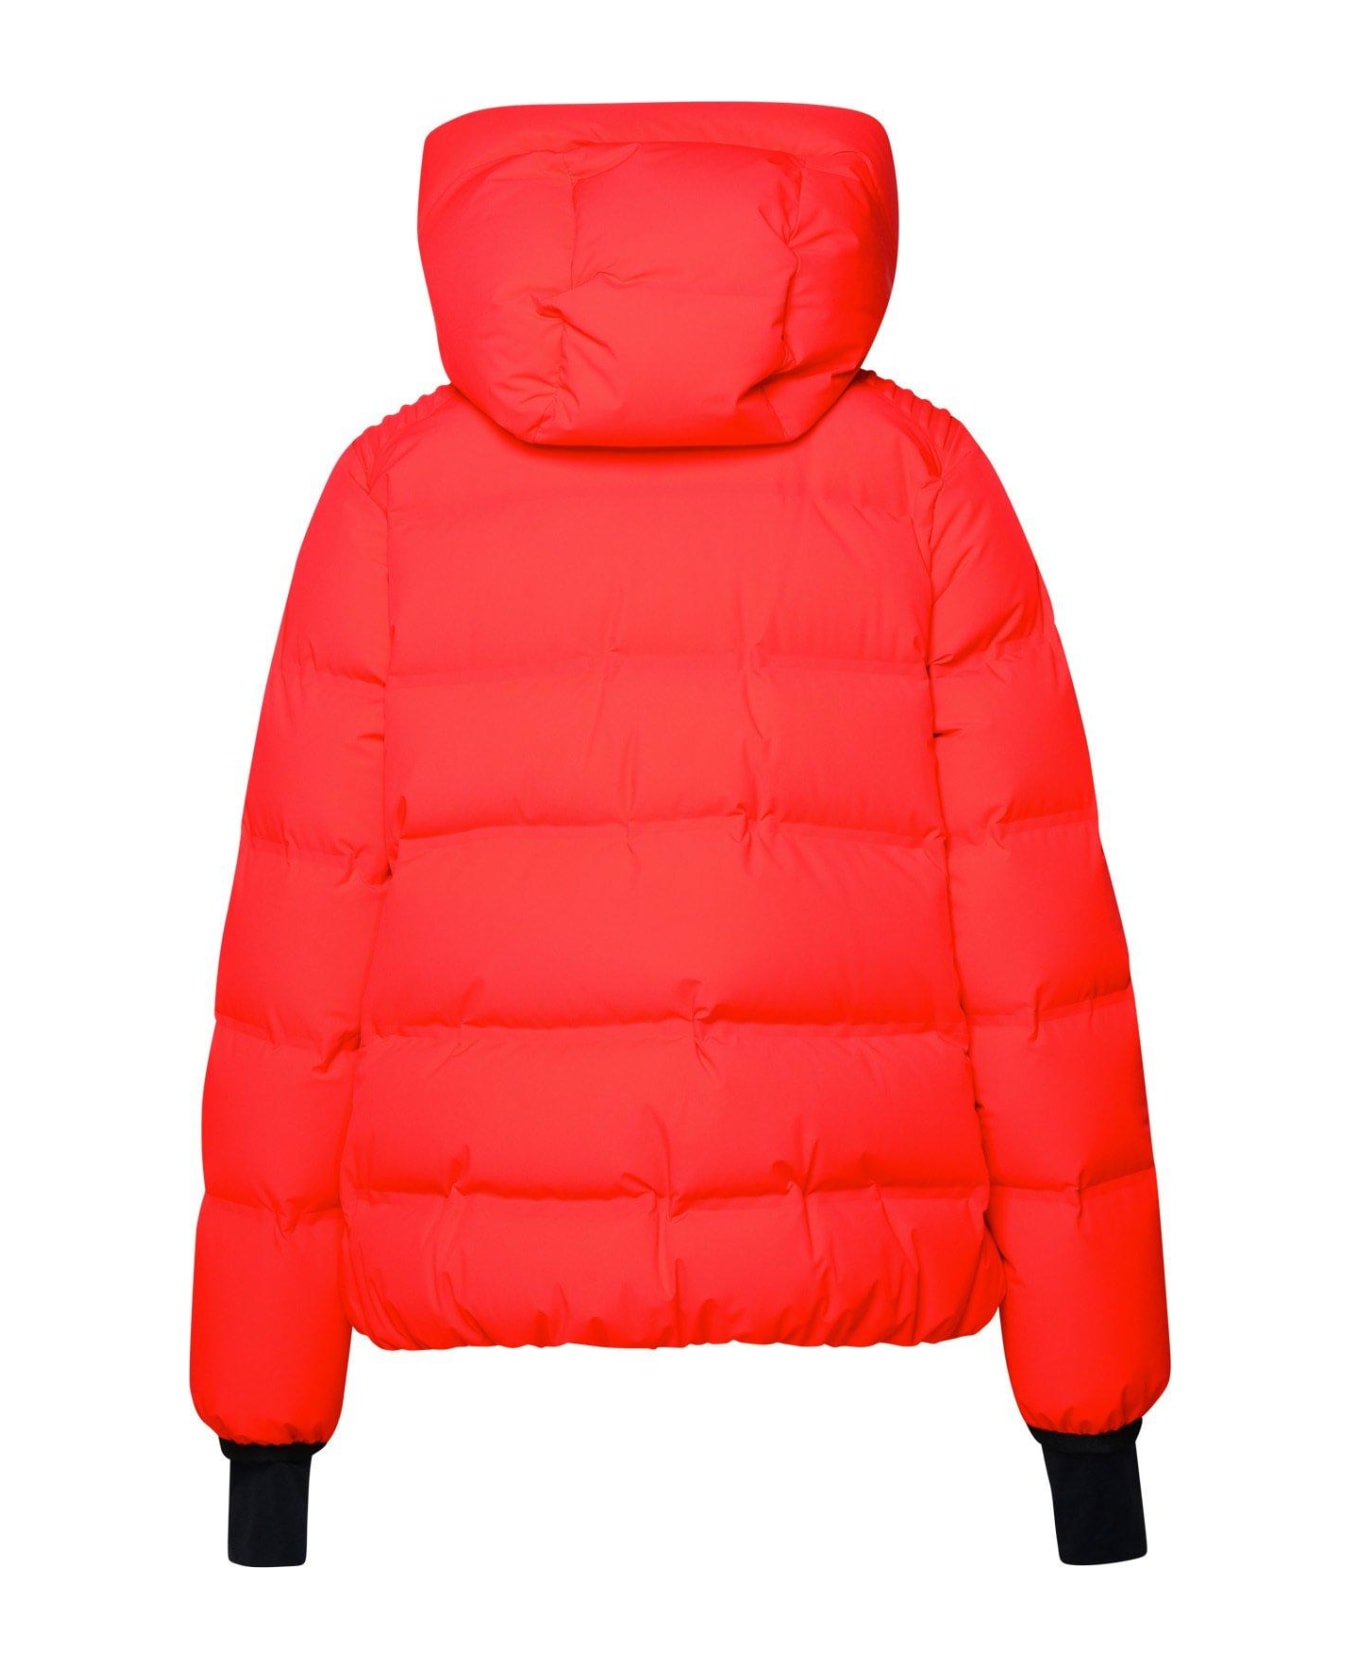 Moncler Grenoble Suisses Padded Down Jacket - RED ダウンジャケット